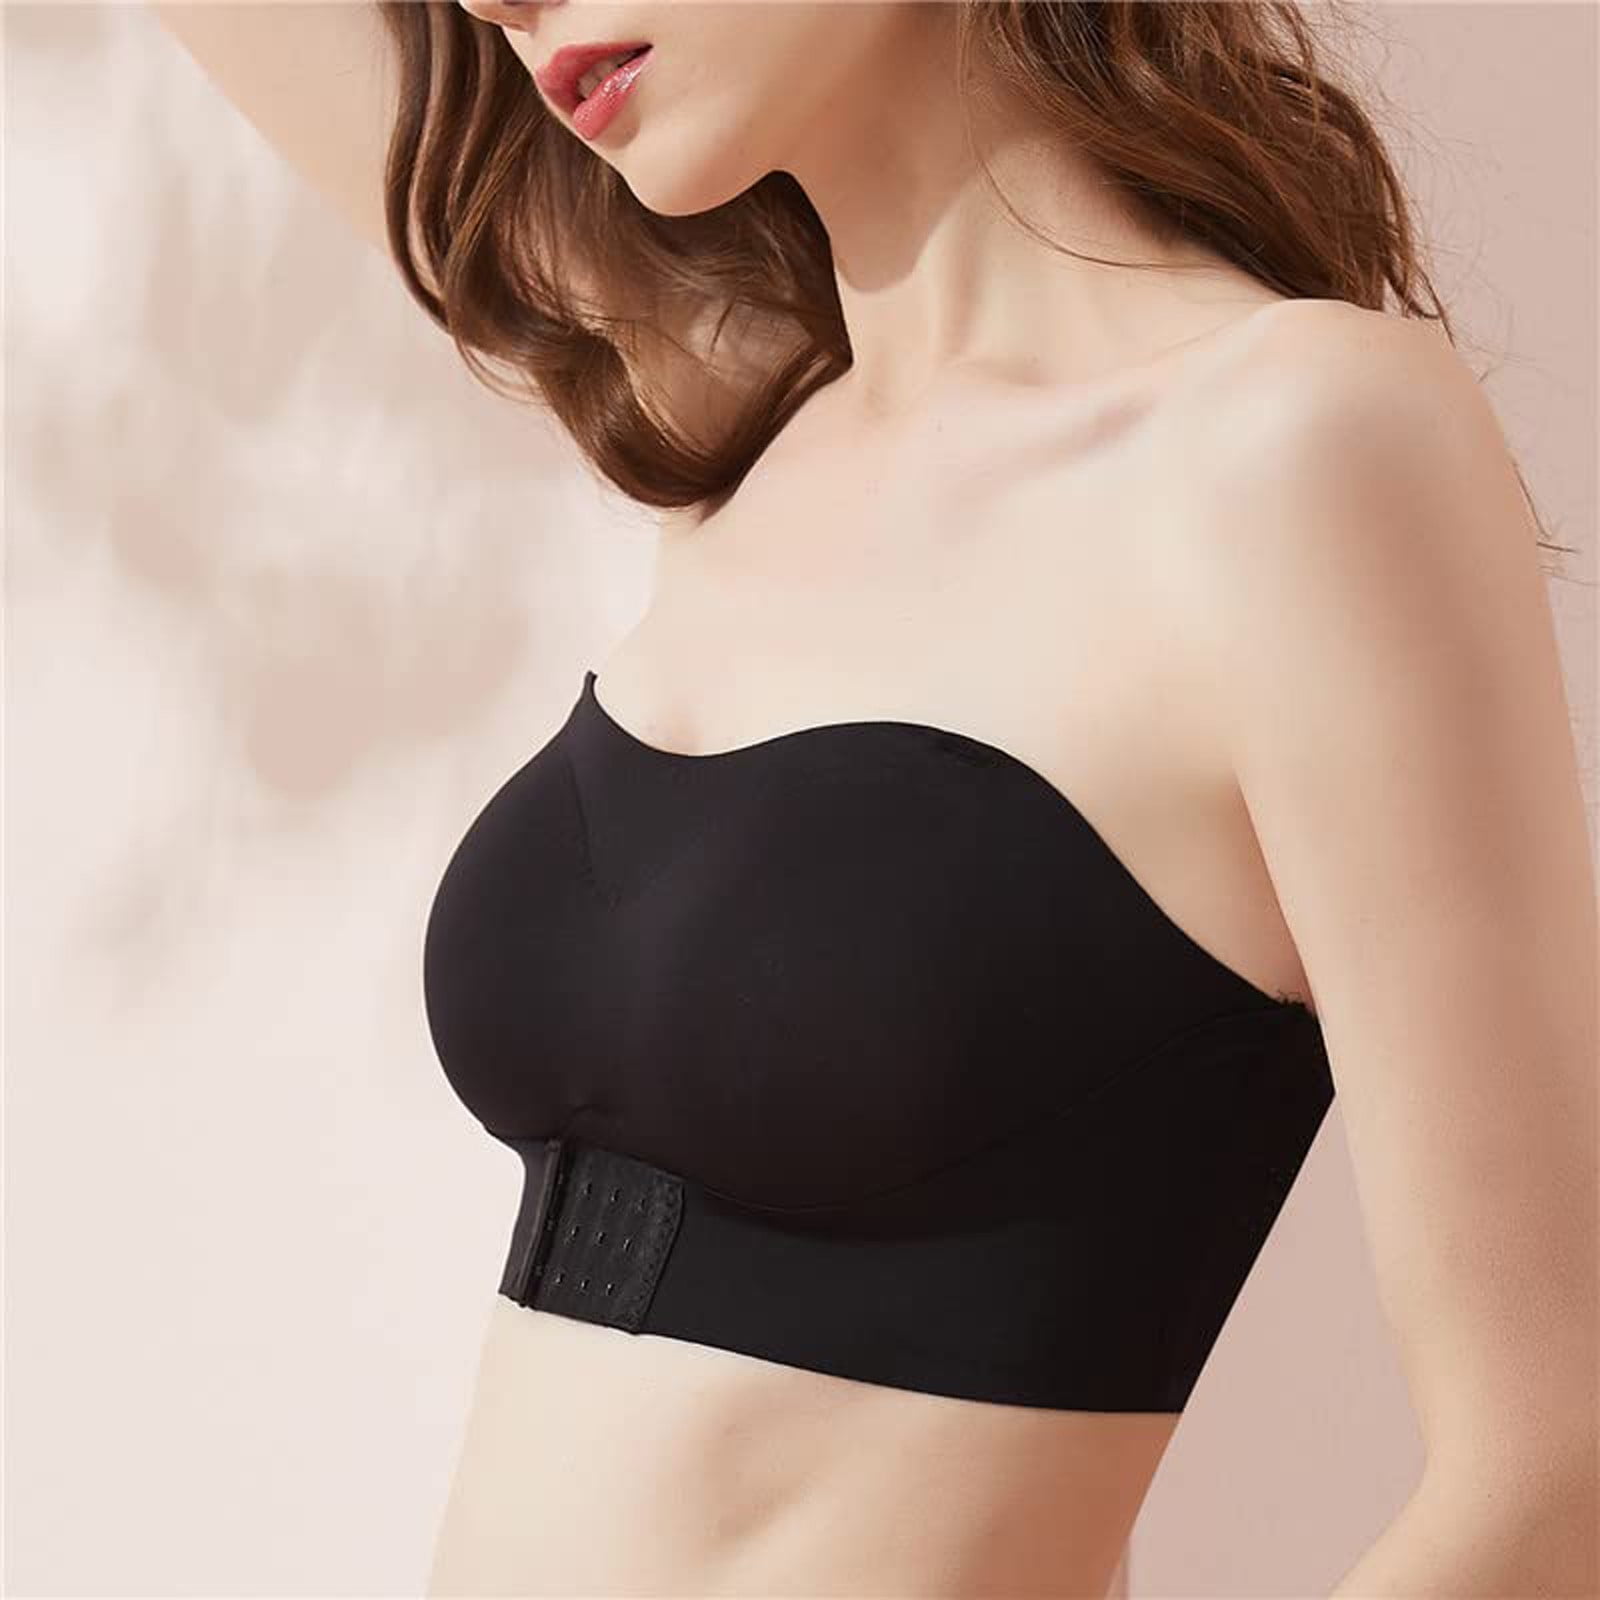 Qcmgmg Bandeaus Strapless Bras for Women Seamless Front